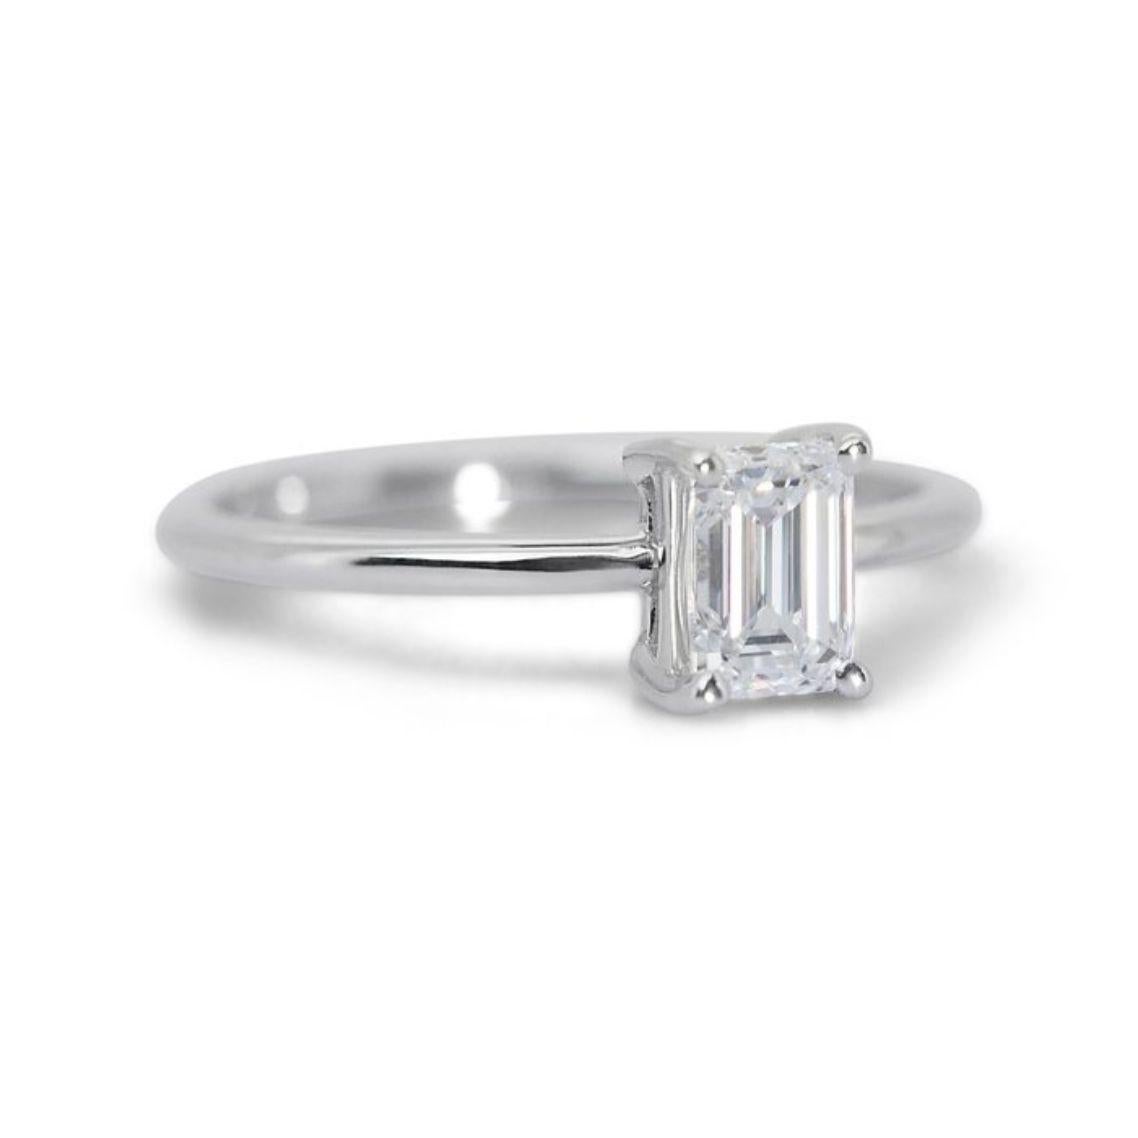 Emerald Cut Captivating 0.9 Carat Emerald Diamond Ring in 18K White Gold For Sale